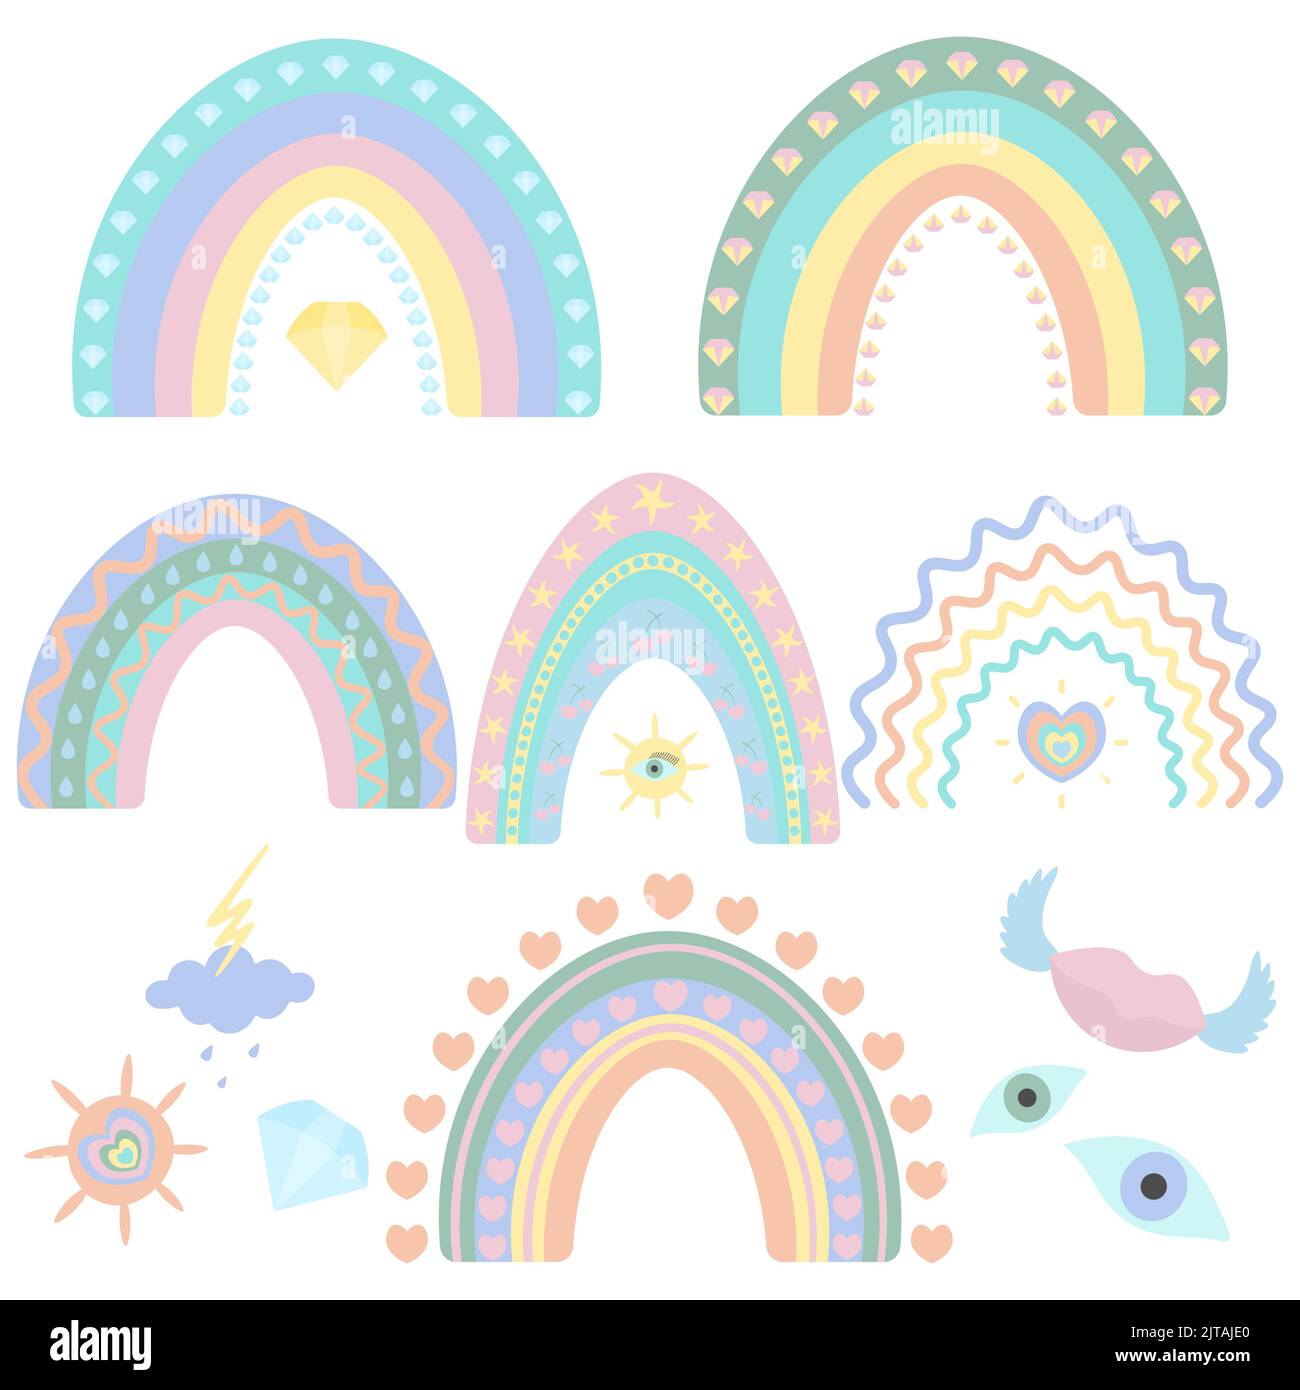 Rainbow. Vector set of illustrations. Isolated white background. Boho style. Colorful collection. A striking natural phenomenon. Ethnic motives. Stock Vector